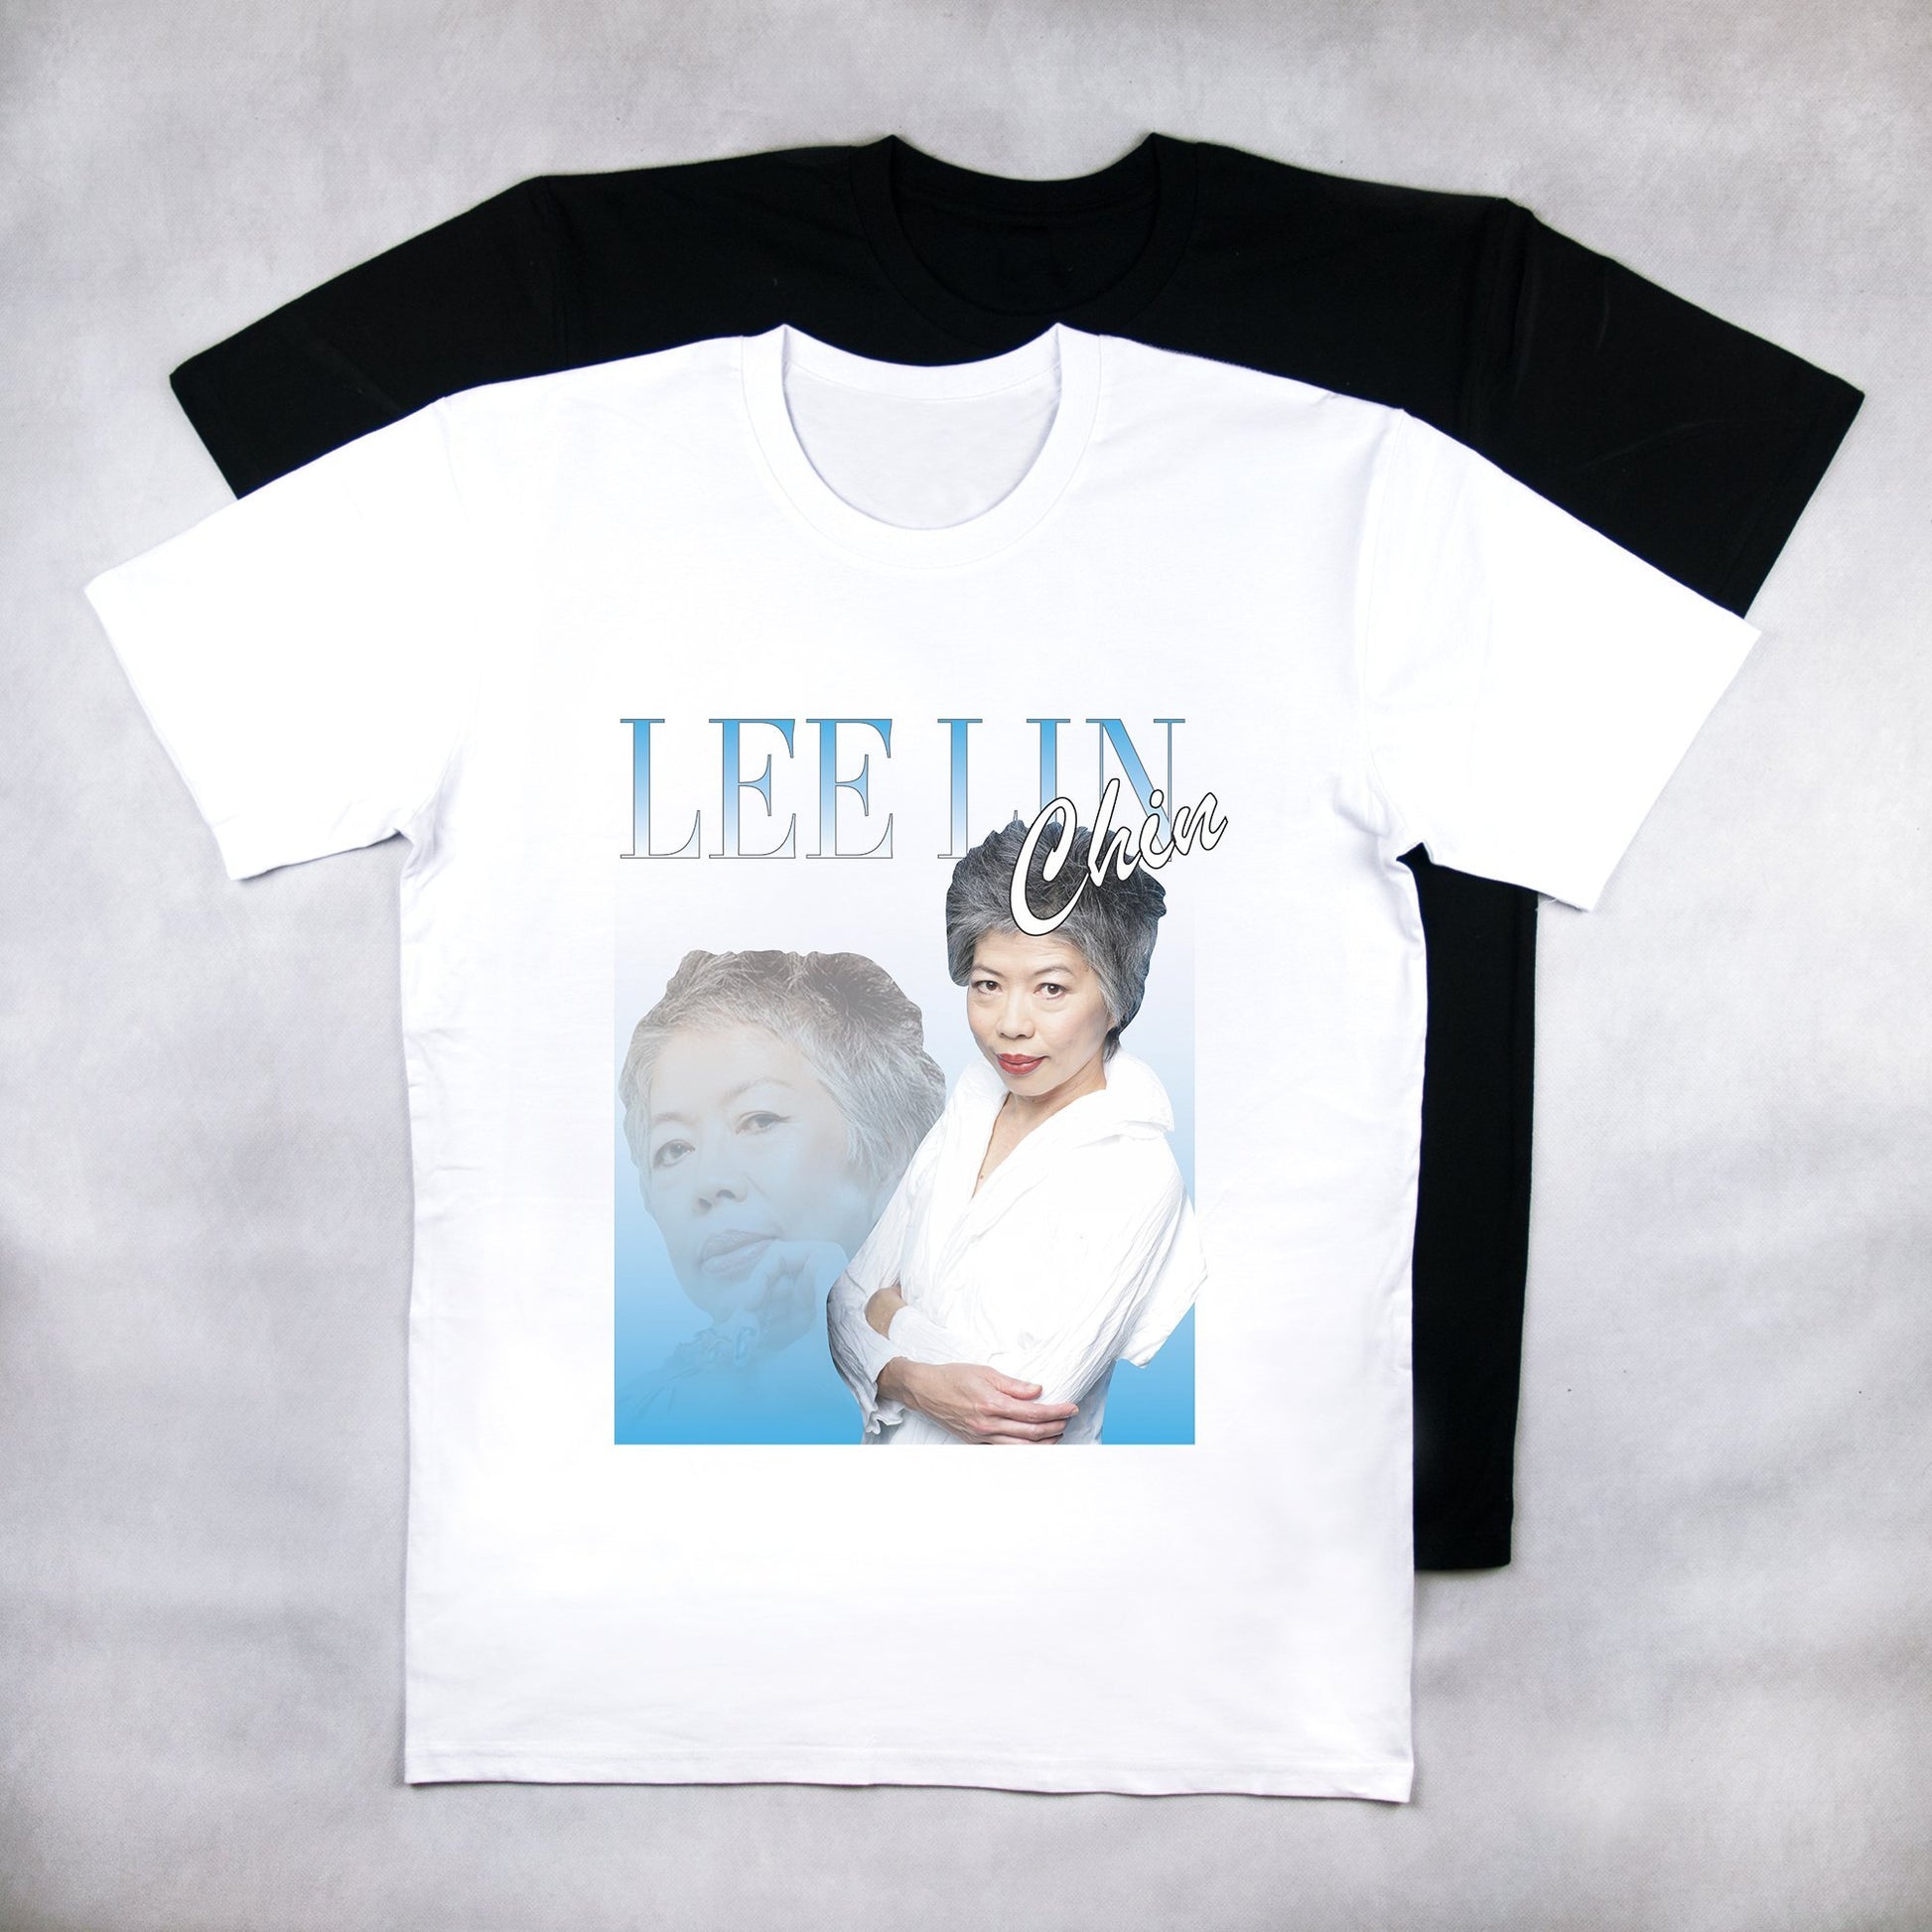 Classy Duds Short Sleeve T-Shirts Lee Lin Chin Commemorative Classic Tee